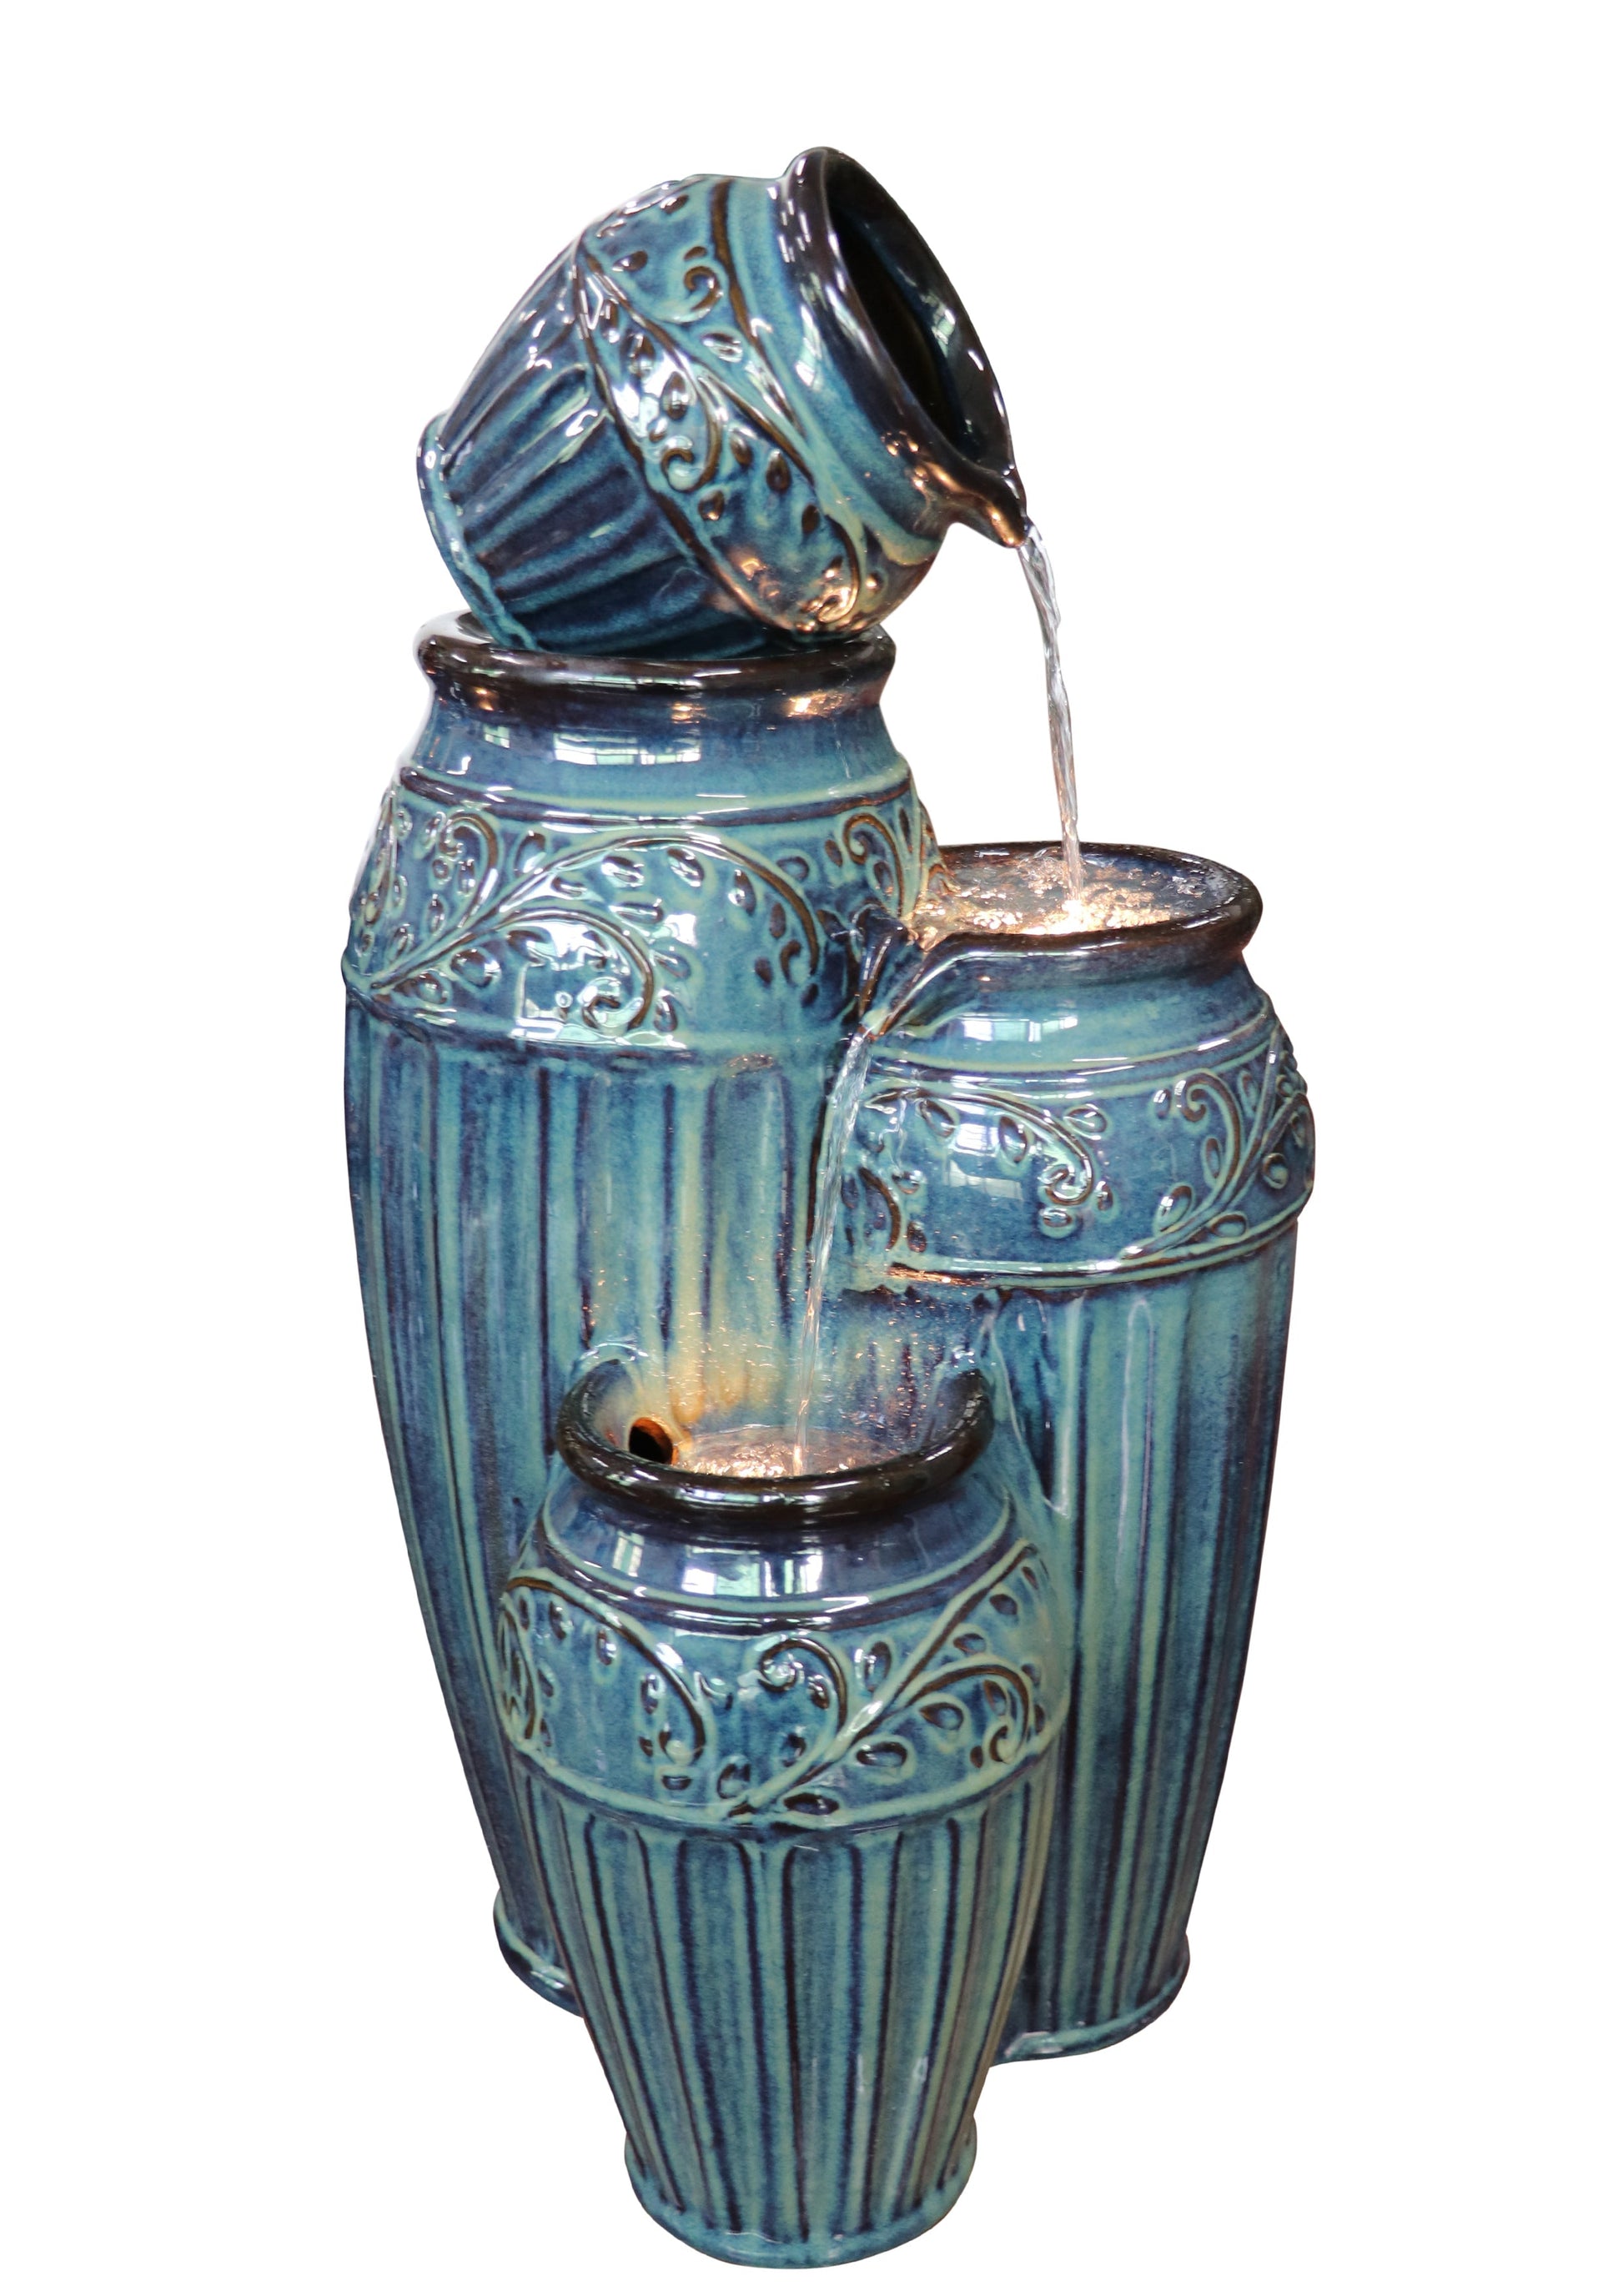 Rosaleda Glazed Ceramic Water Feature Water Feature Turquoise 